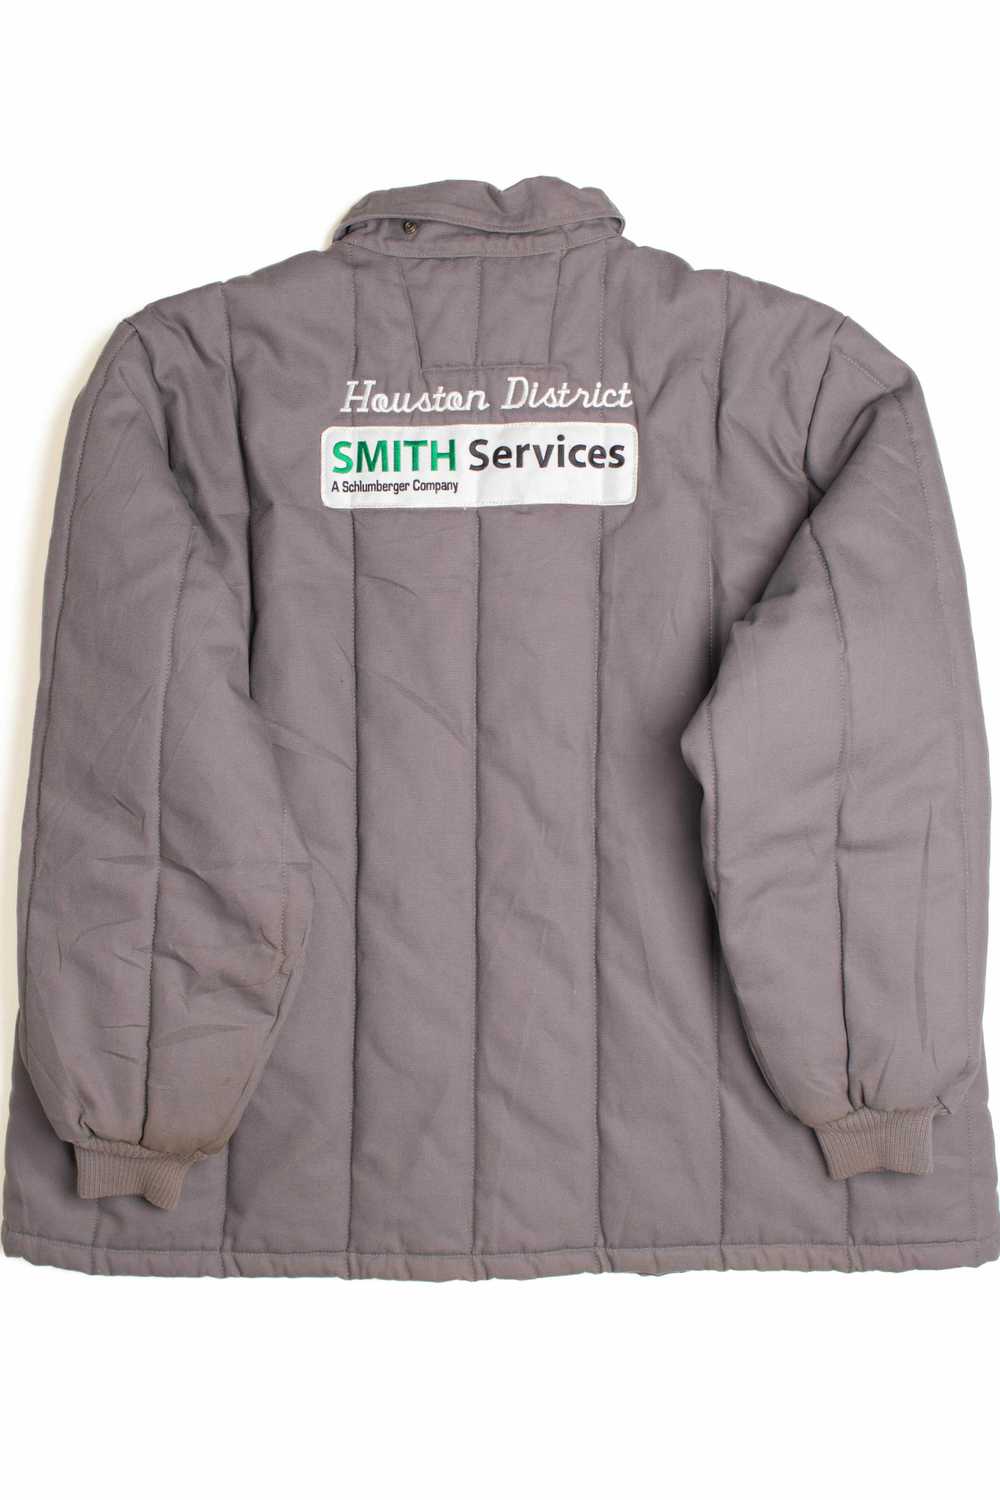 Smith Services Winter Coat - image 3